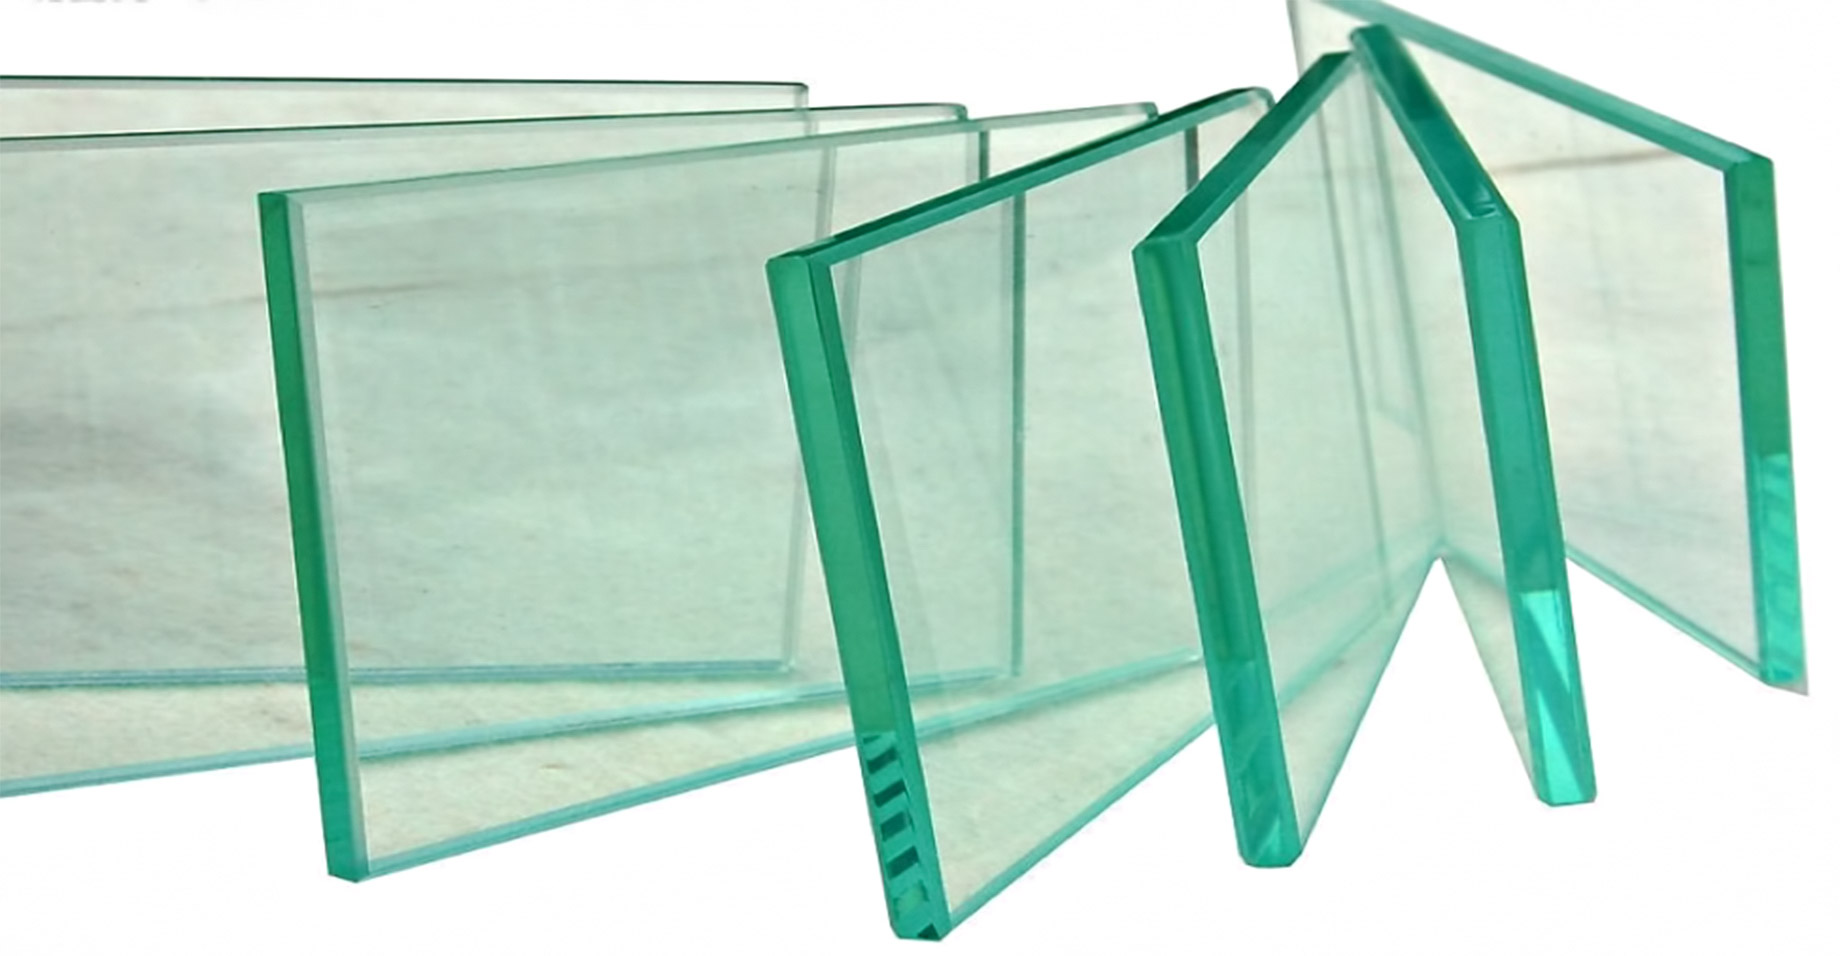 Float Glass – Provides Strength and Toughness To Windows